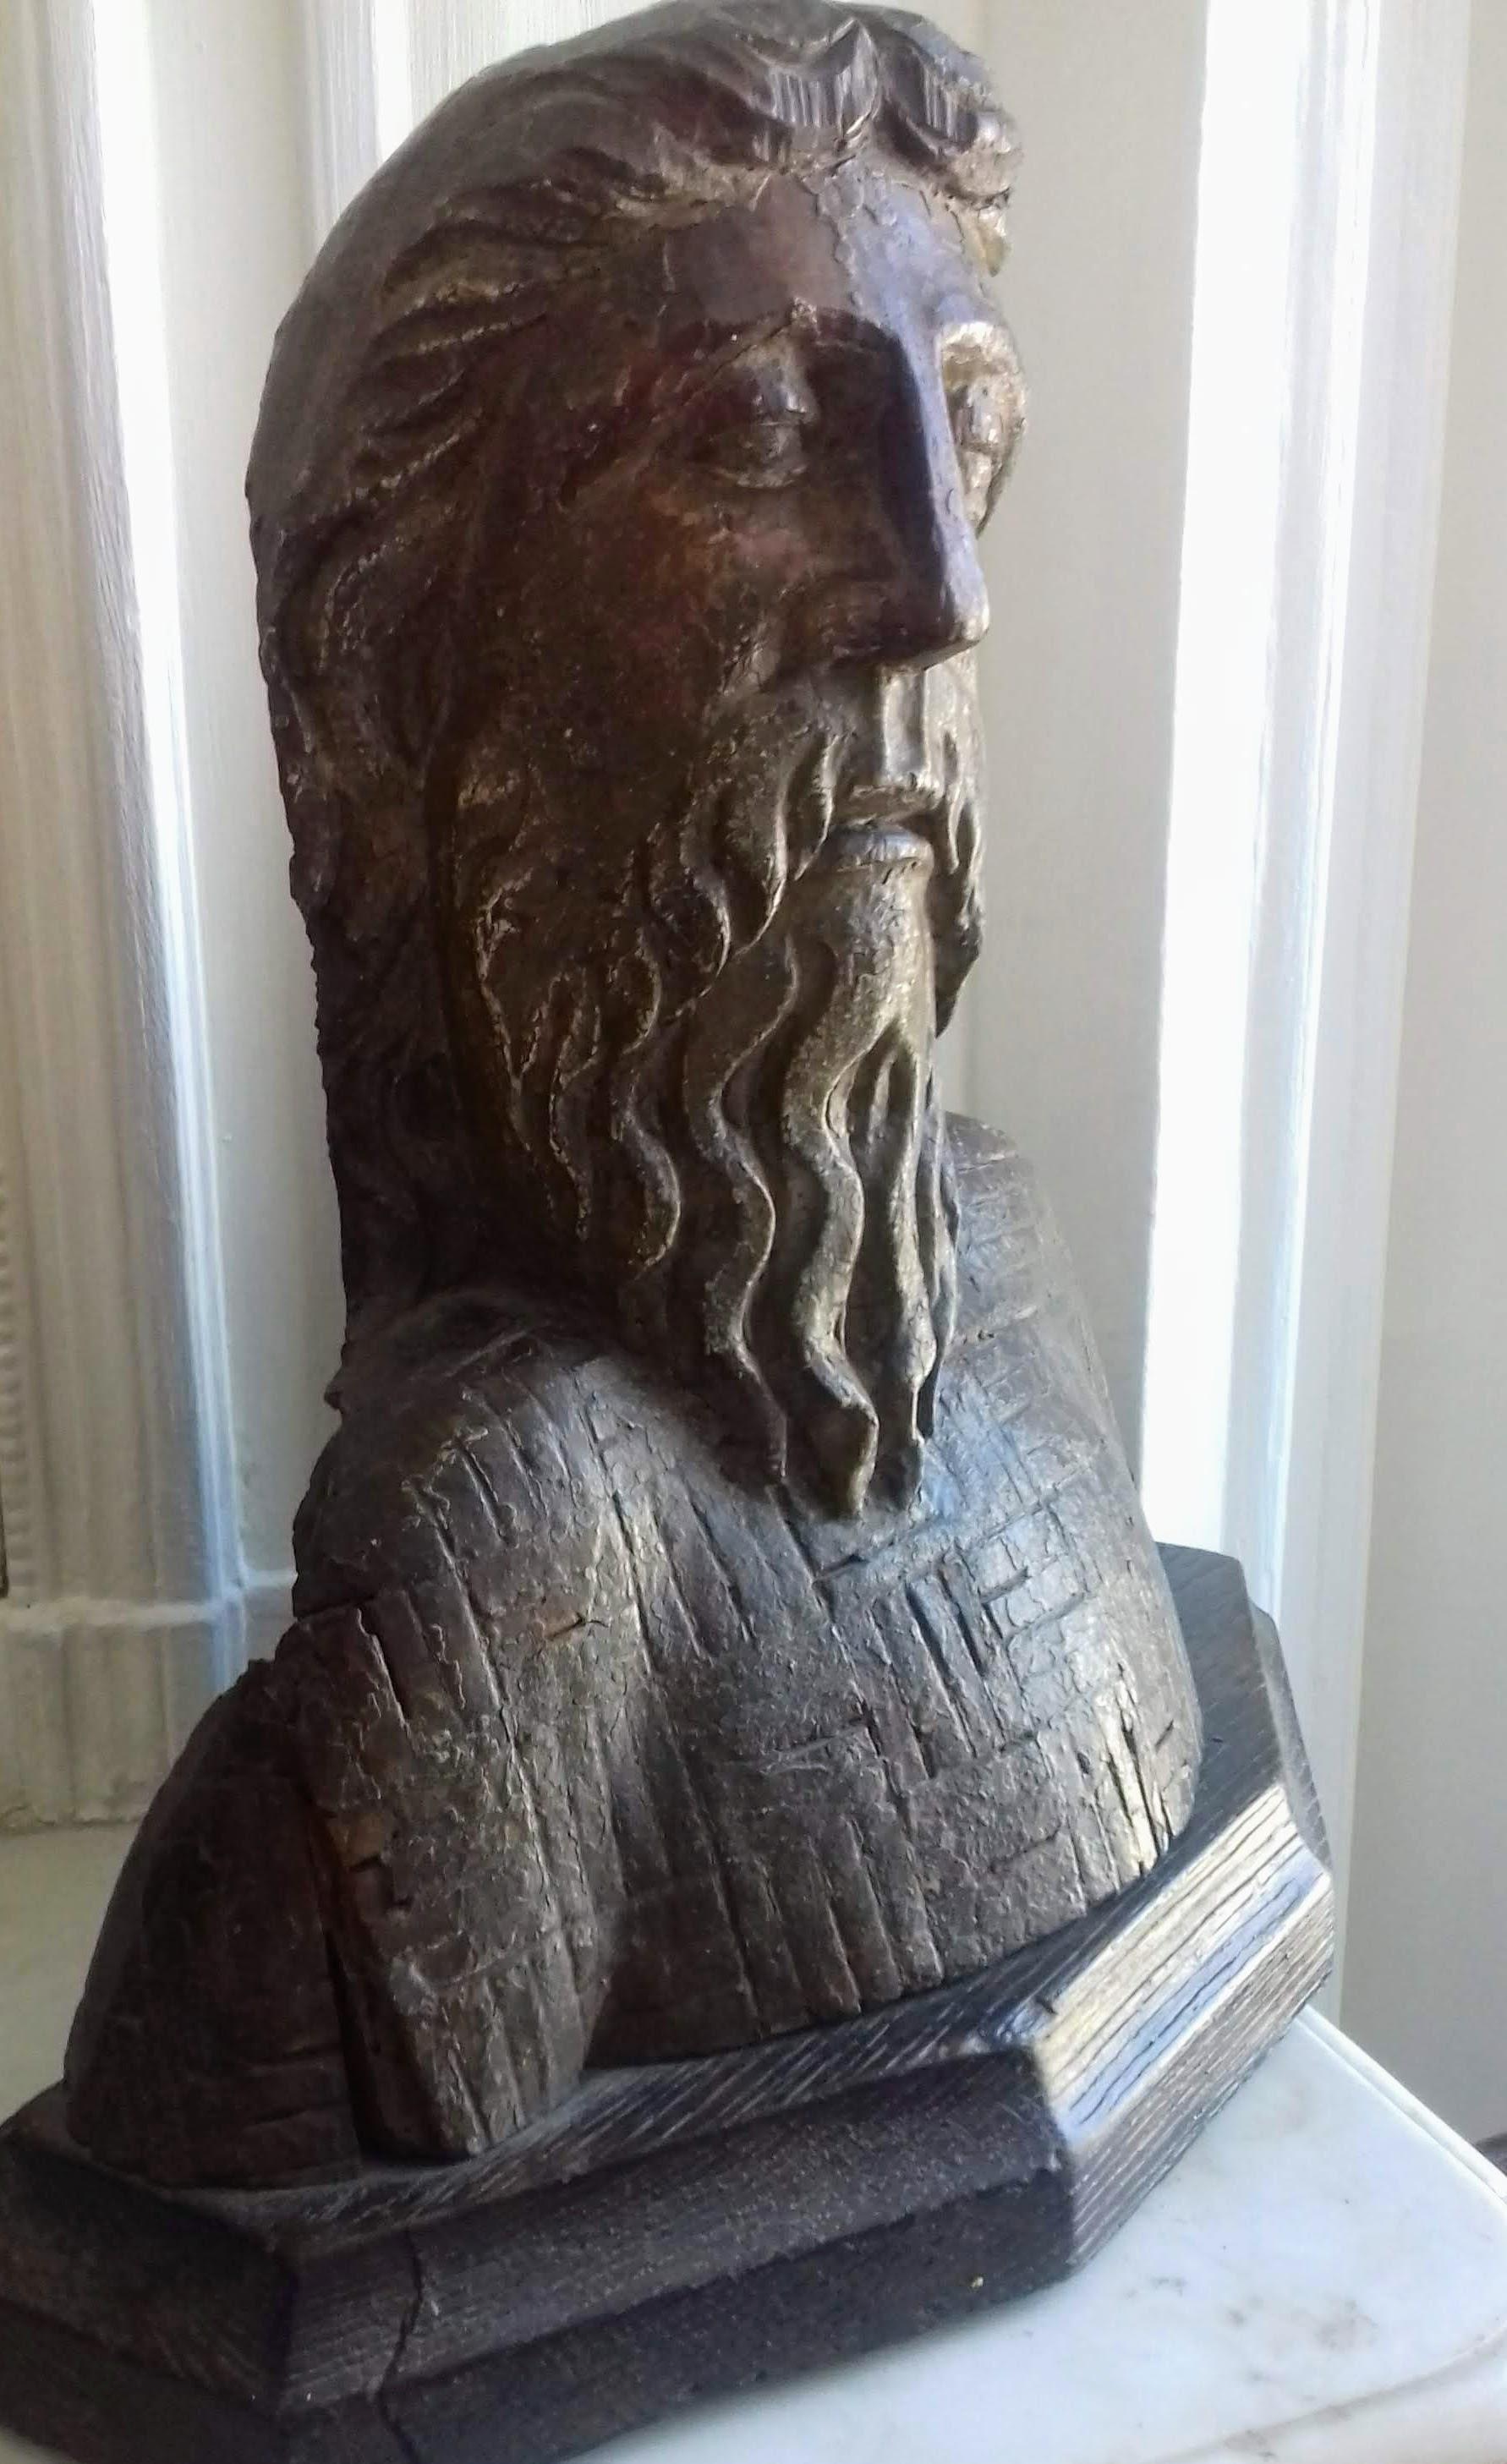 Early Renaissance 15th Century Gothic Bust of a saint or secular figure carving - Brown Figurative Sculpture by Unknown